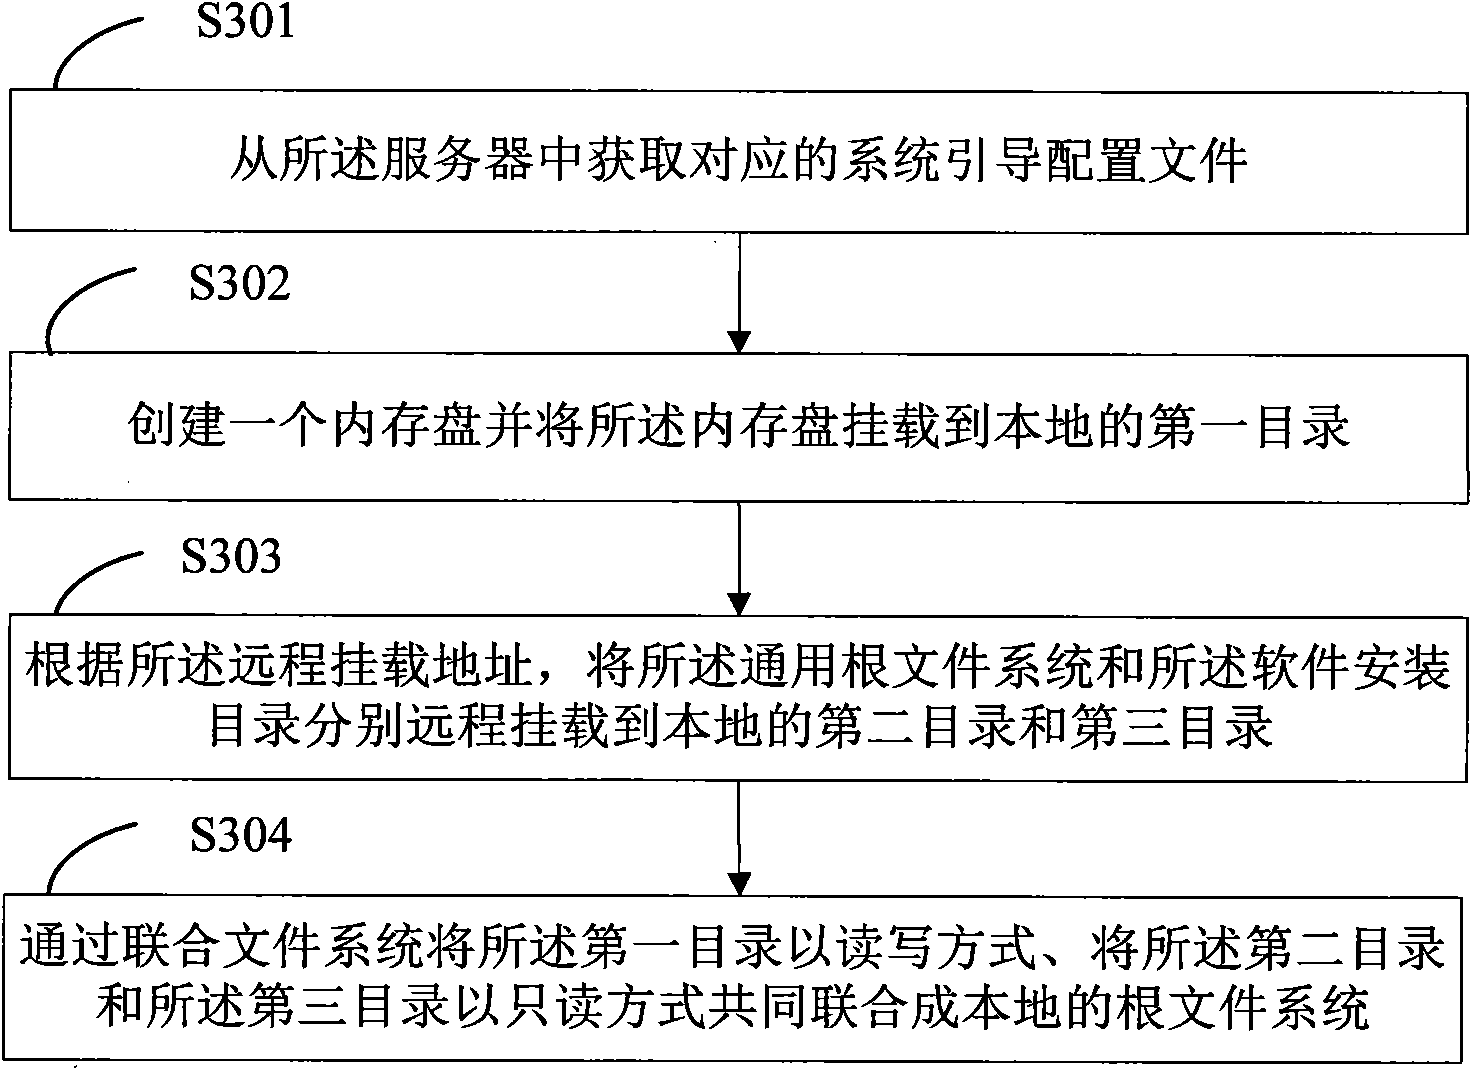 Diskless system, workstation thereof, and building method of local root file by workstation